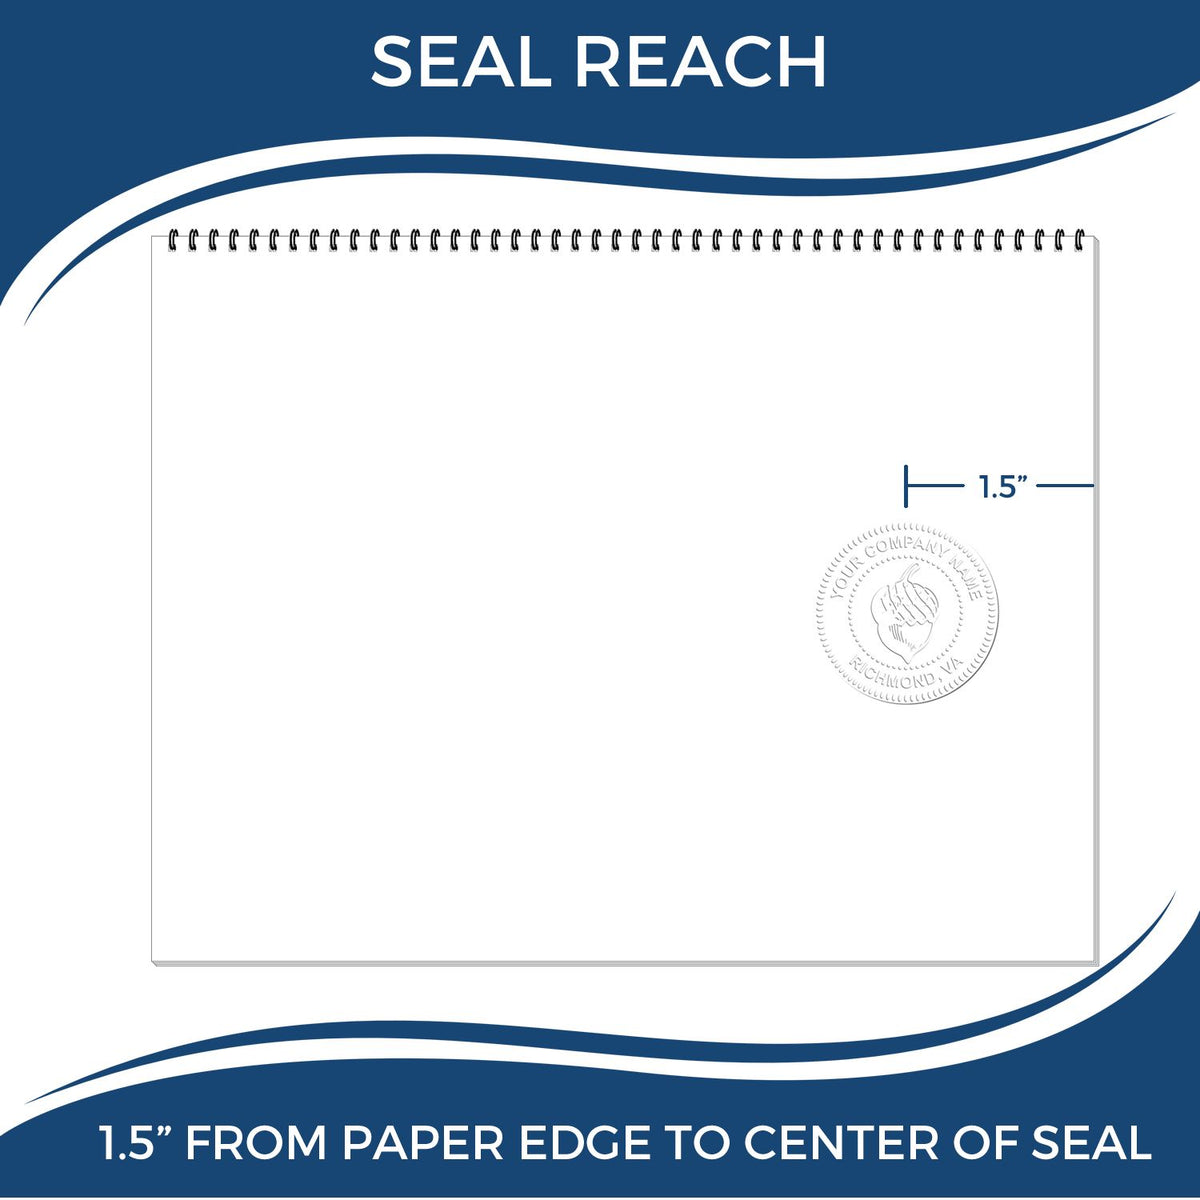 An infographic showing the seal reach which is represented by a ruler and a miniature seal image of the Handheld Iowa Land Surveyor Seal